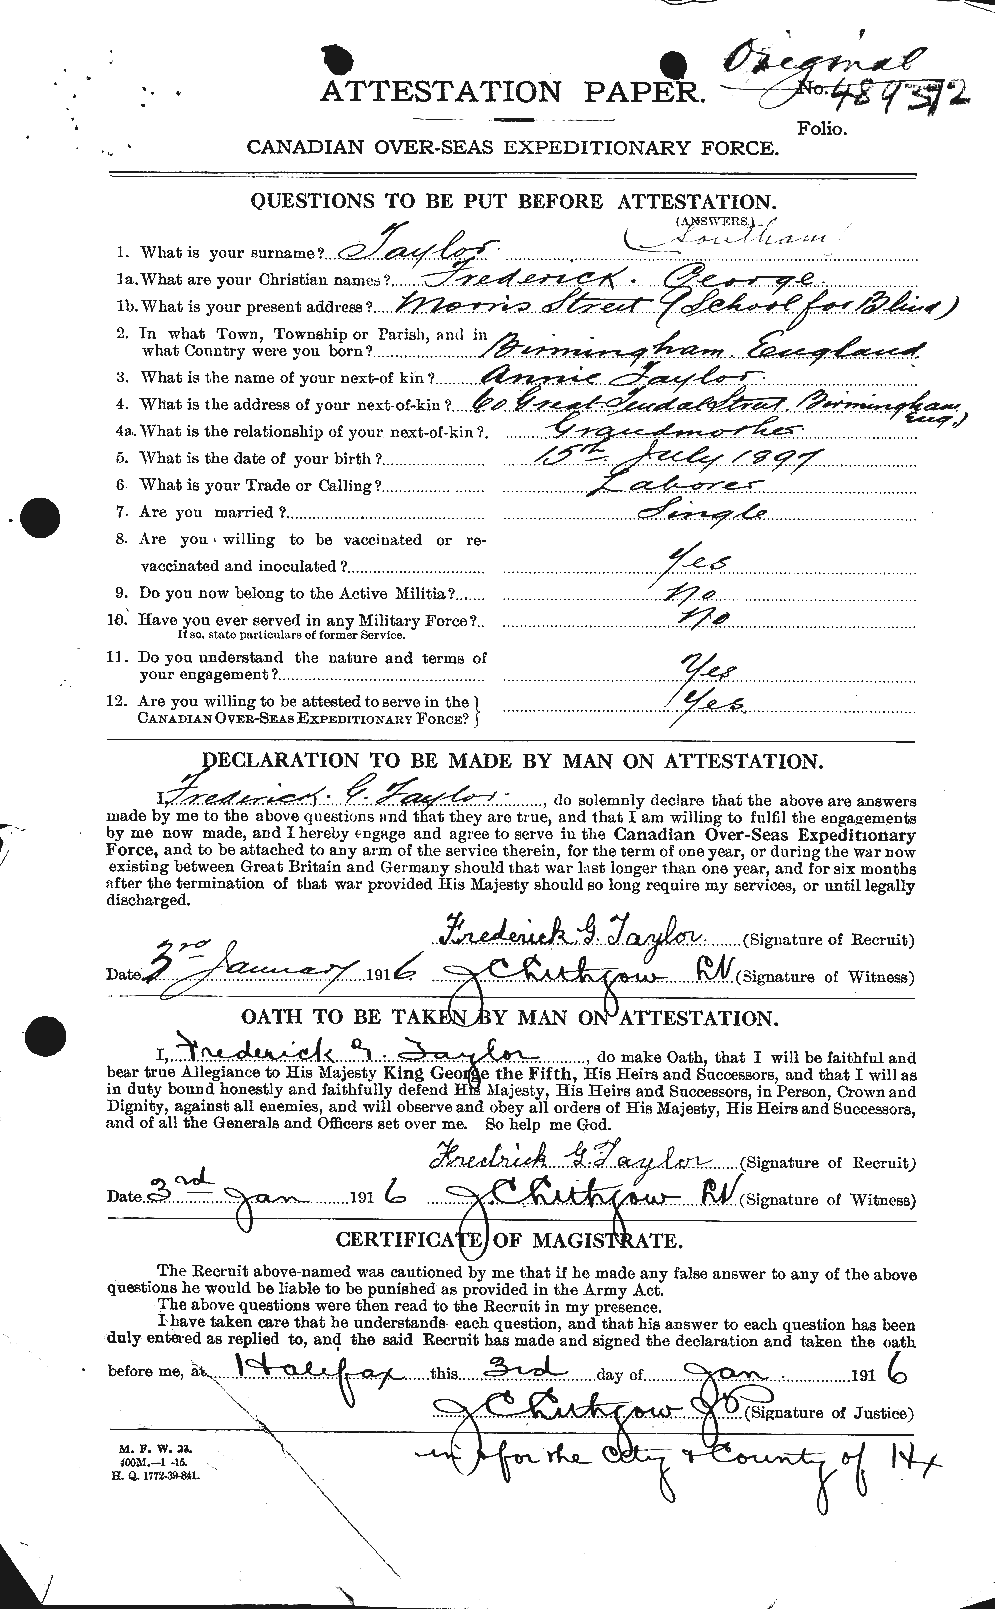 Personnel Records of the First World War - CEF 692054a